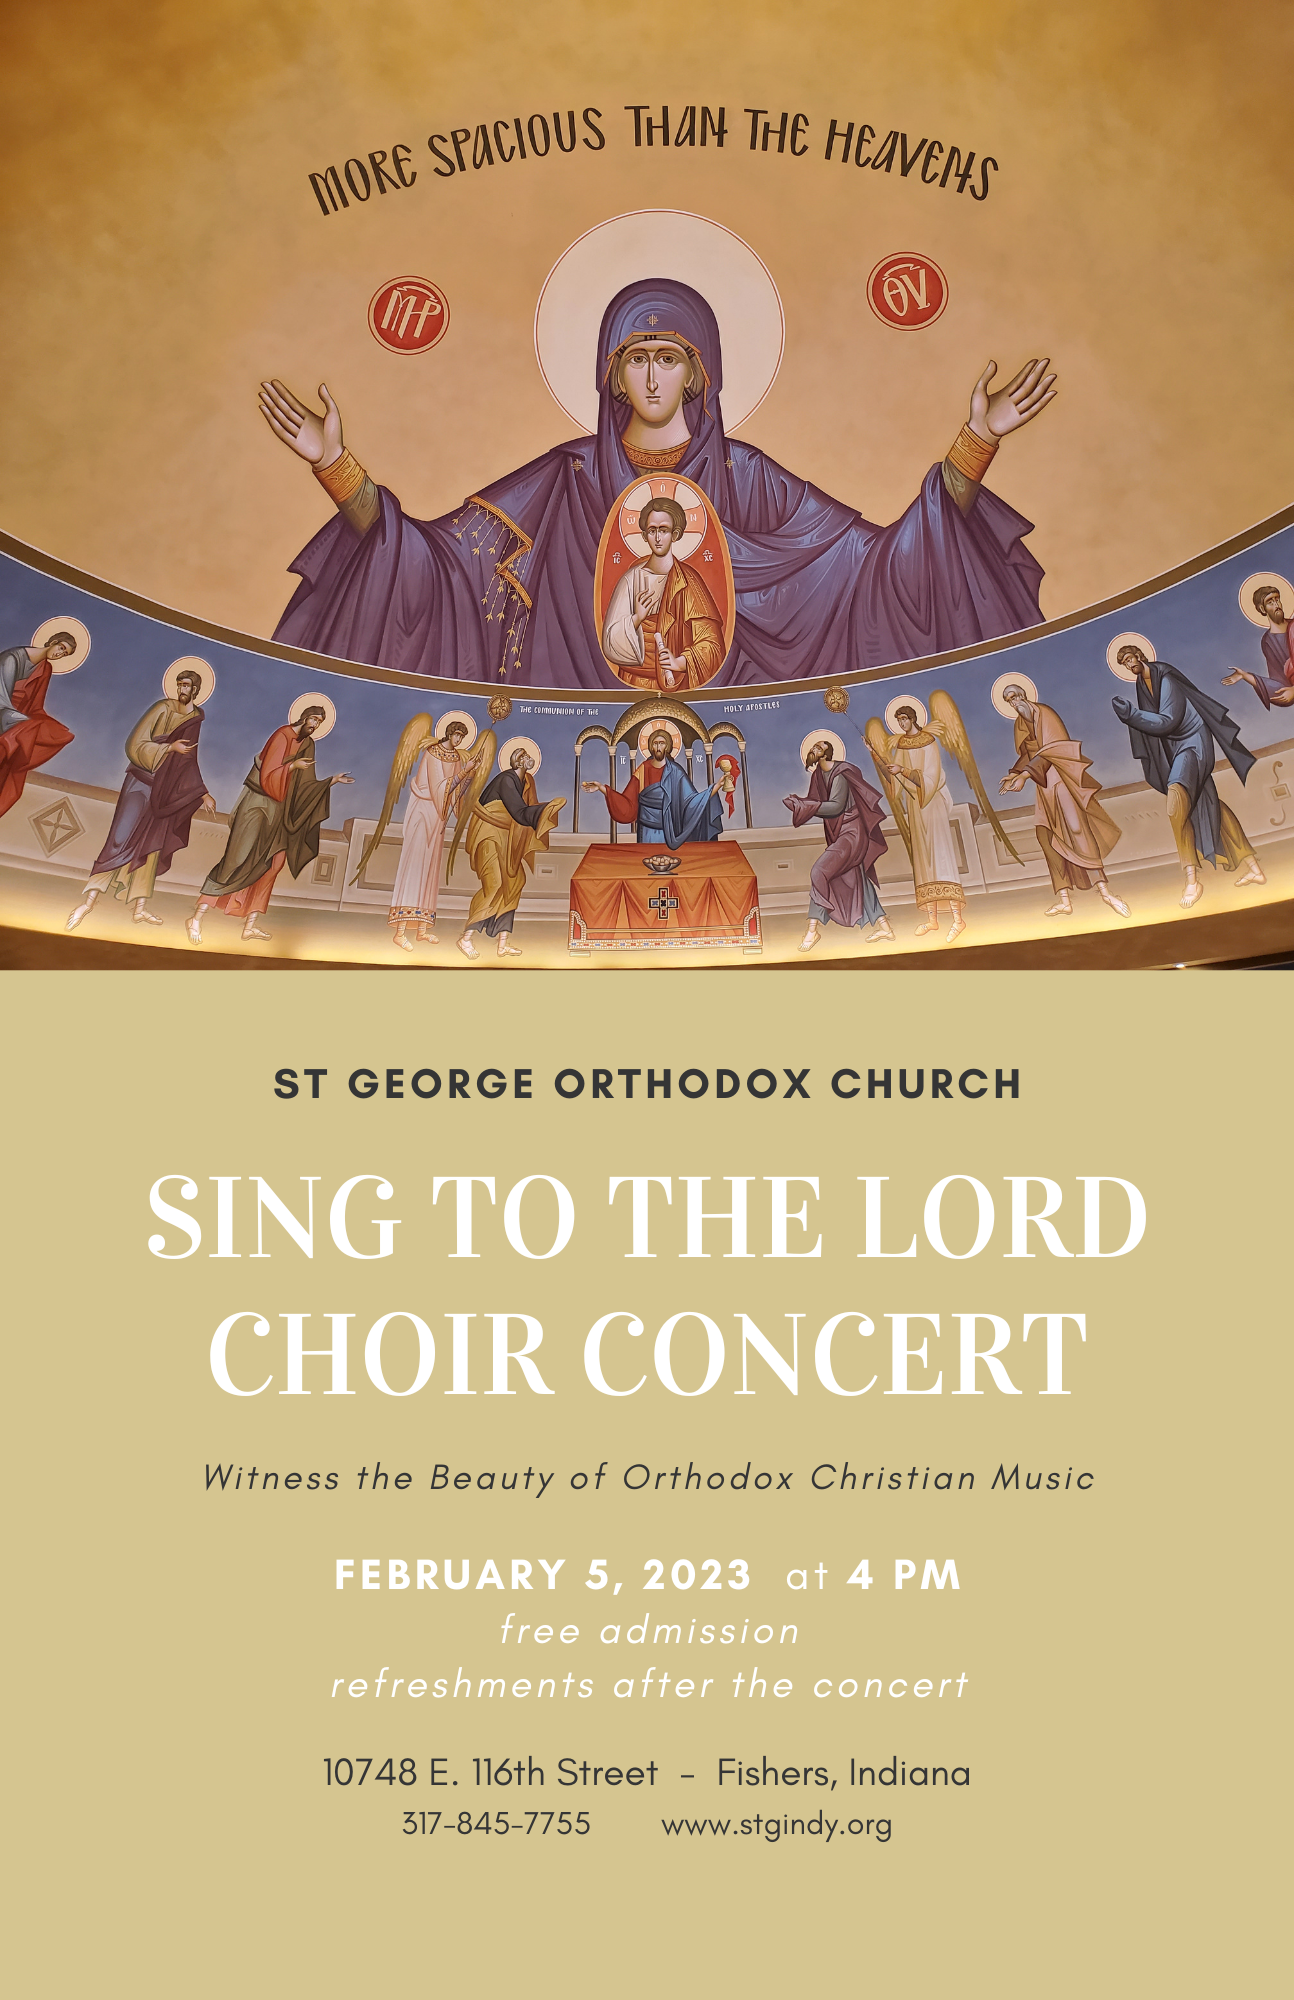 https://www.stgindy.org/wp-content/uploads/2023/01/St-George-Choir-Concert-Feb-5-2023.png